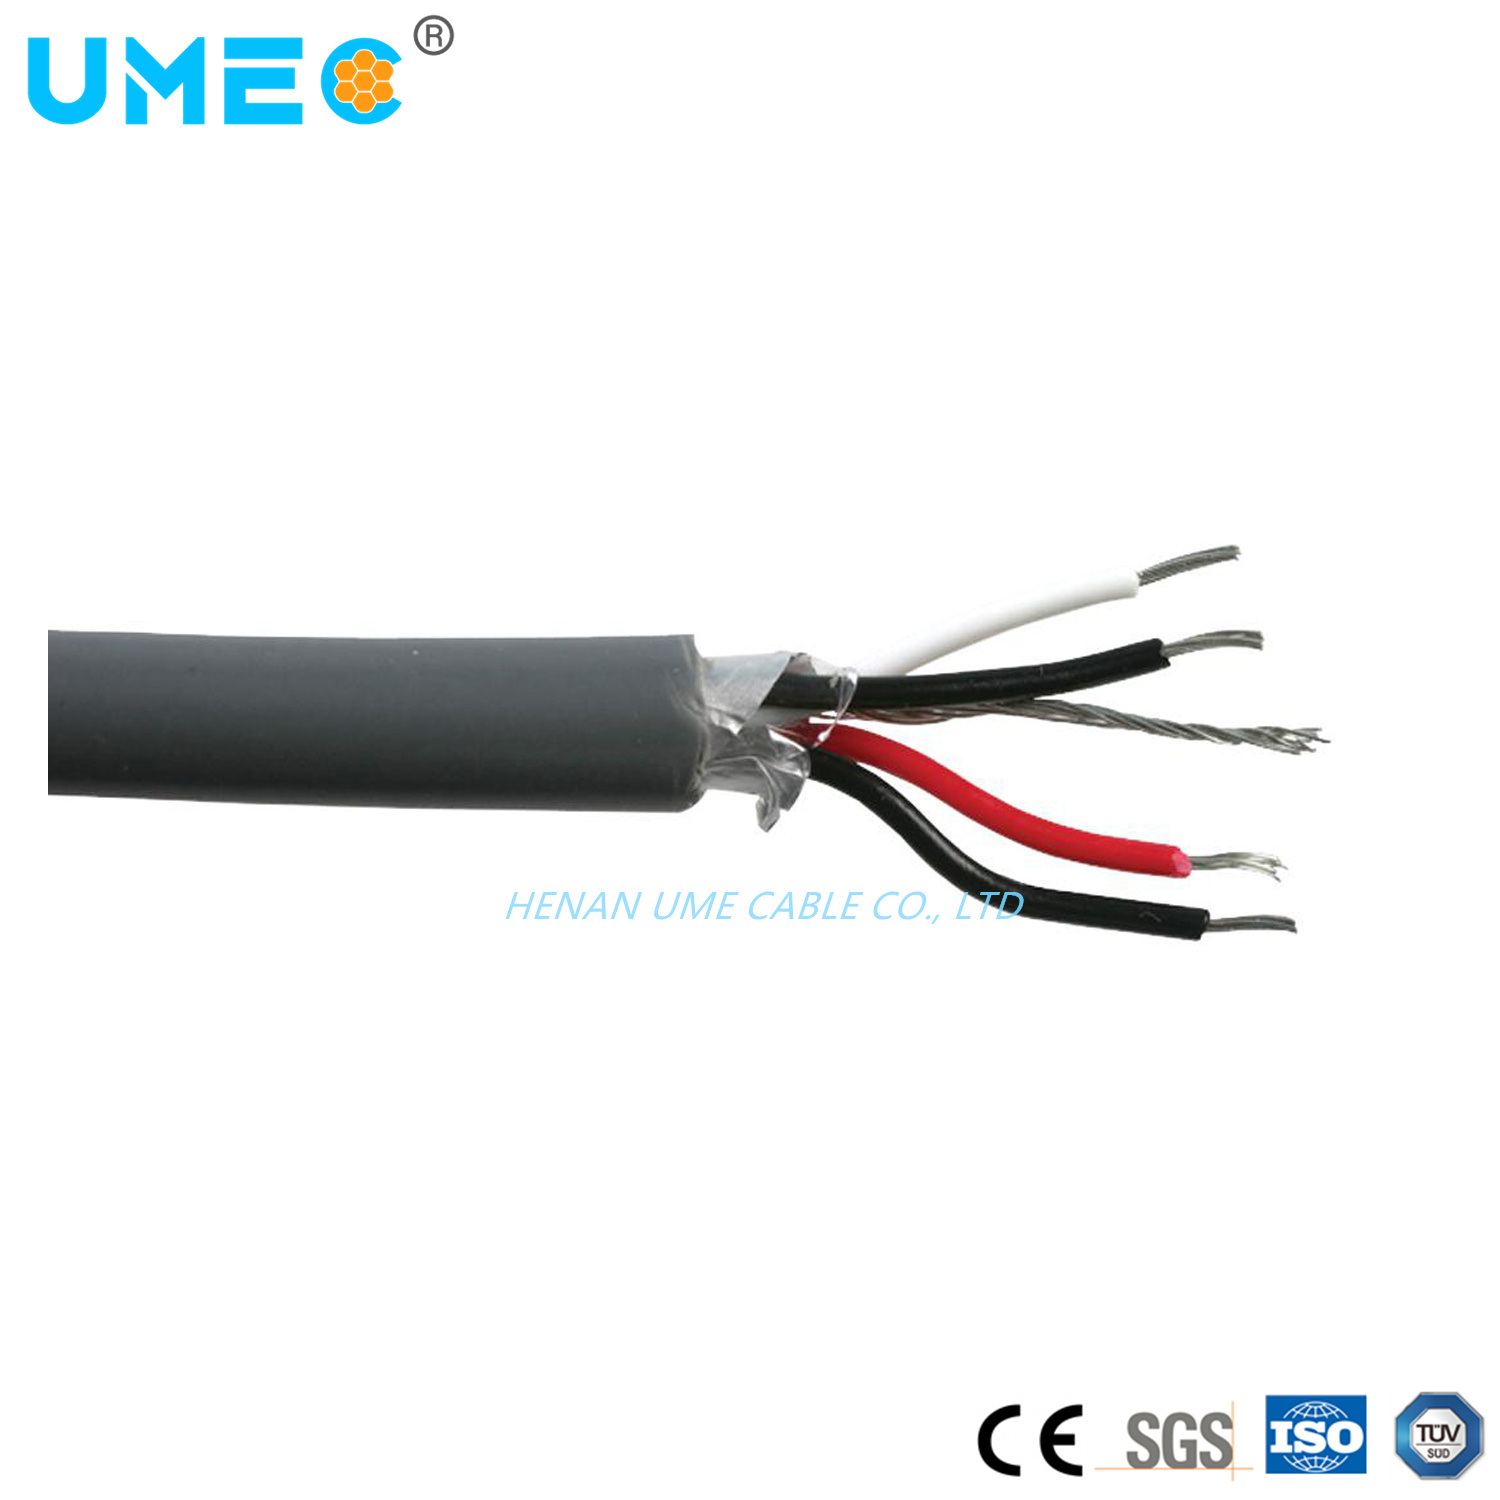 Copper Conductor PVC Insulated Sheathed Flexible Control Cable